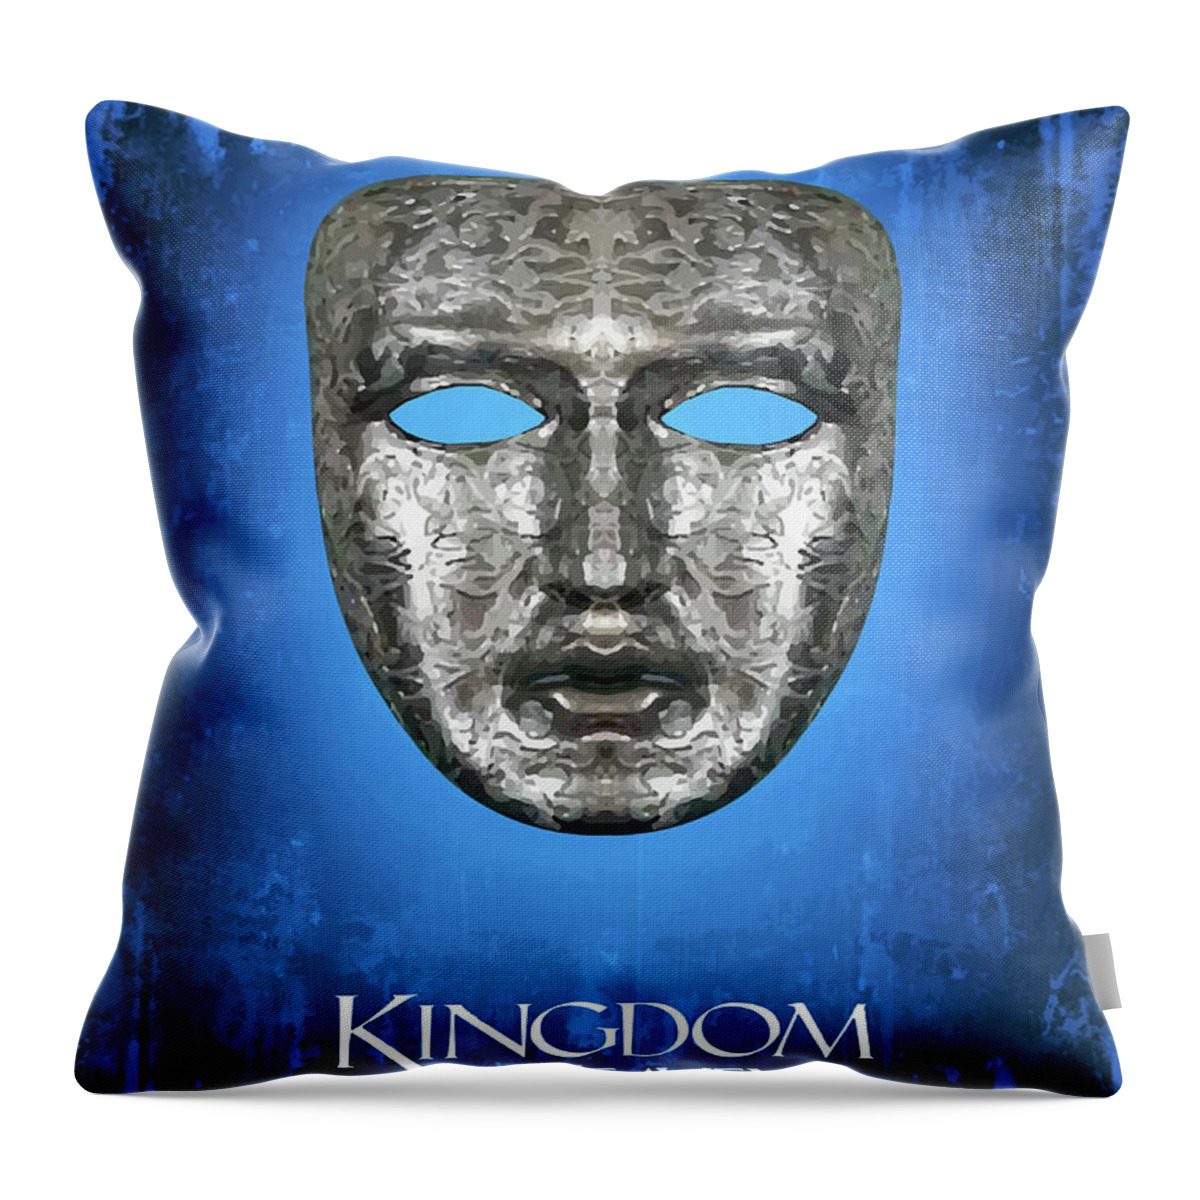 Movie Poster Throw Pillow featuring the digital art Kingdom Of Heaven by Bo Kev